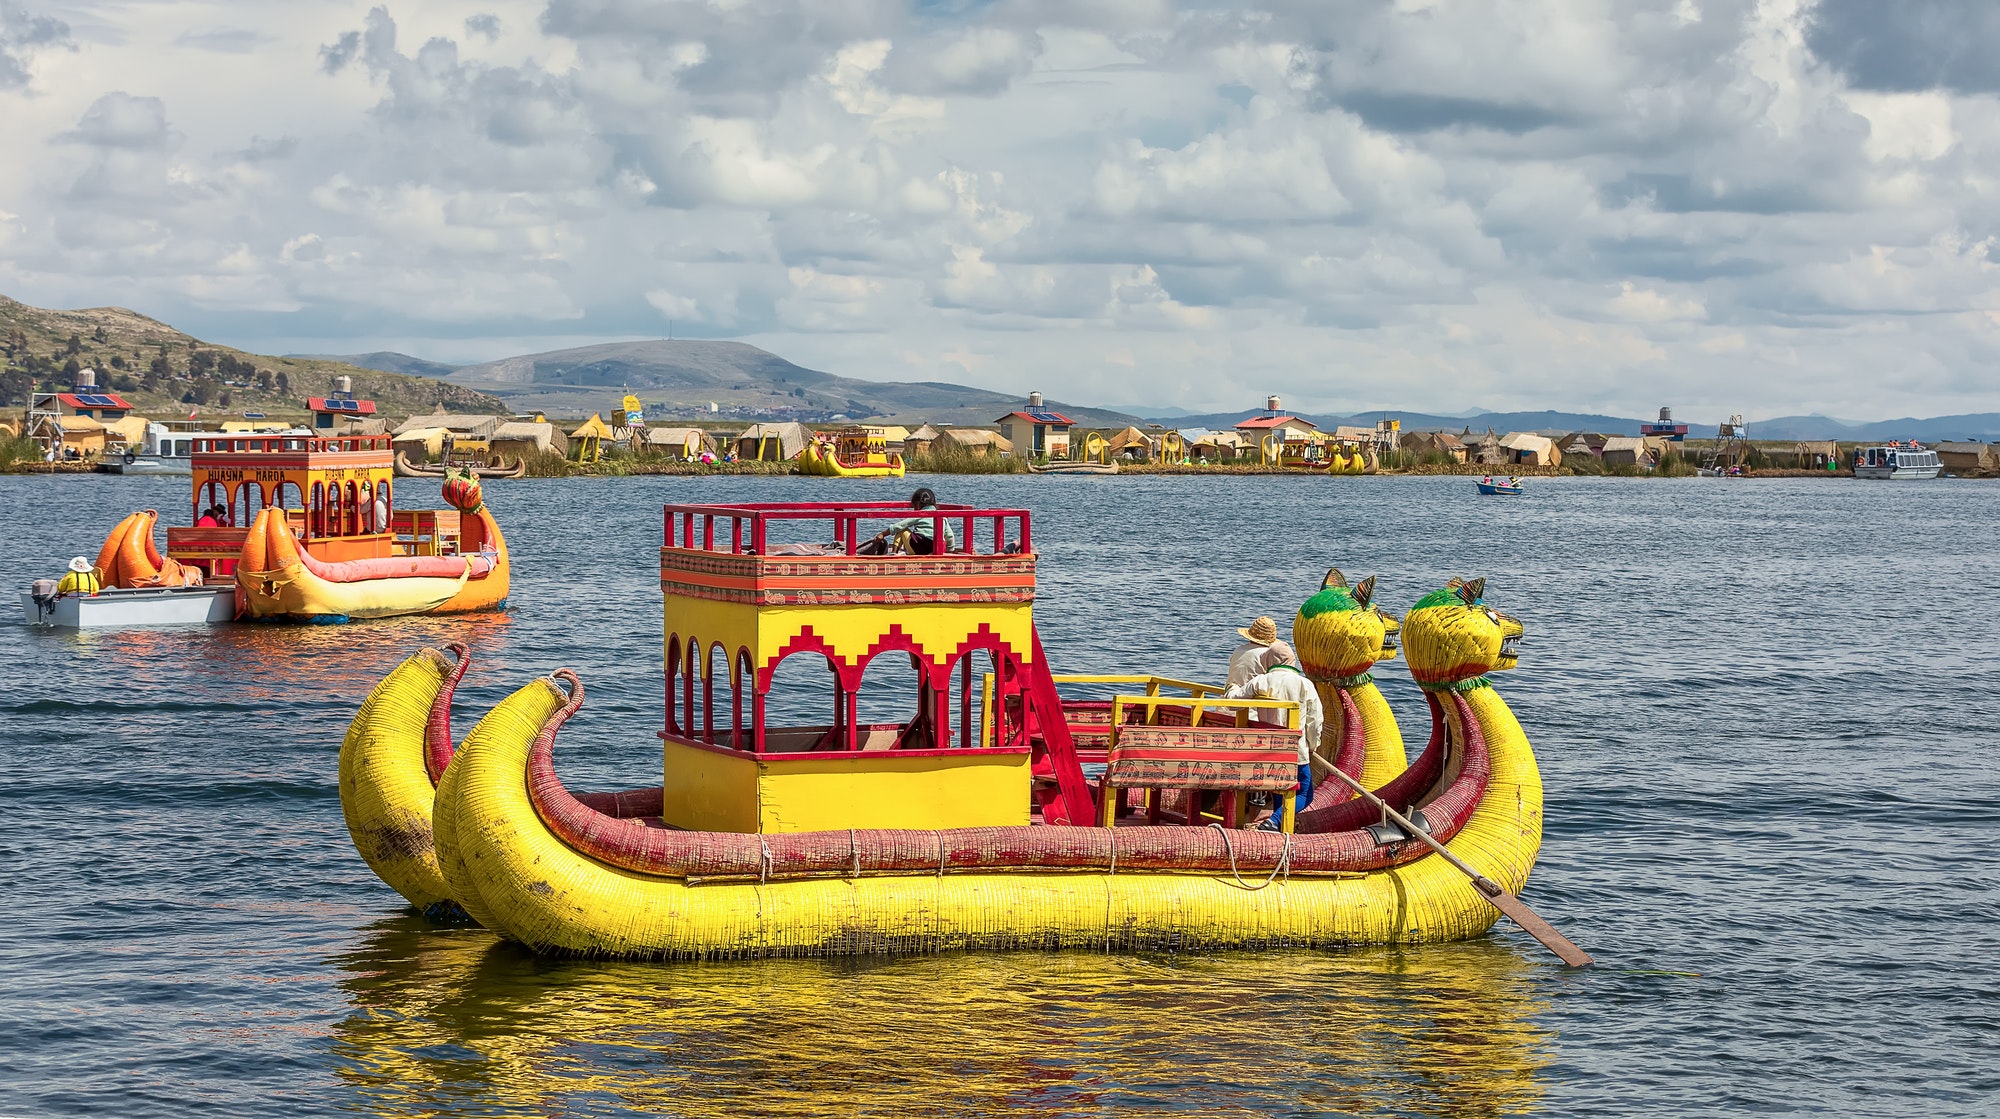 A traditional totora reed boats on the Titicaca lake, Puno. Peru, South America